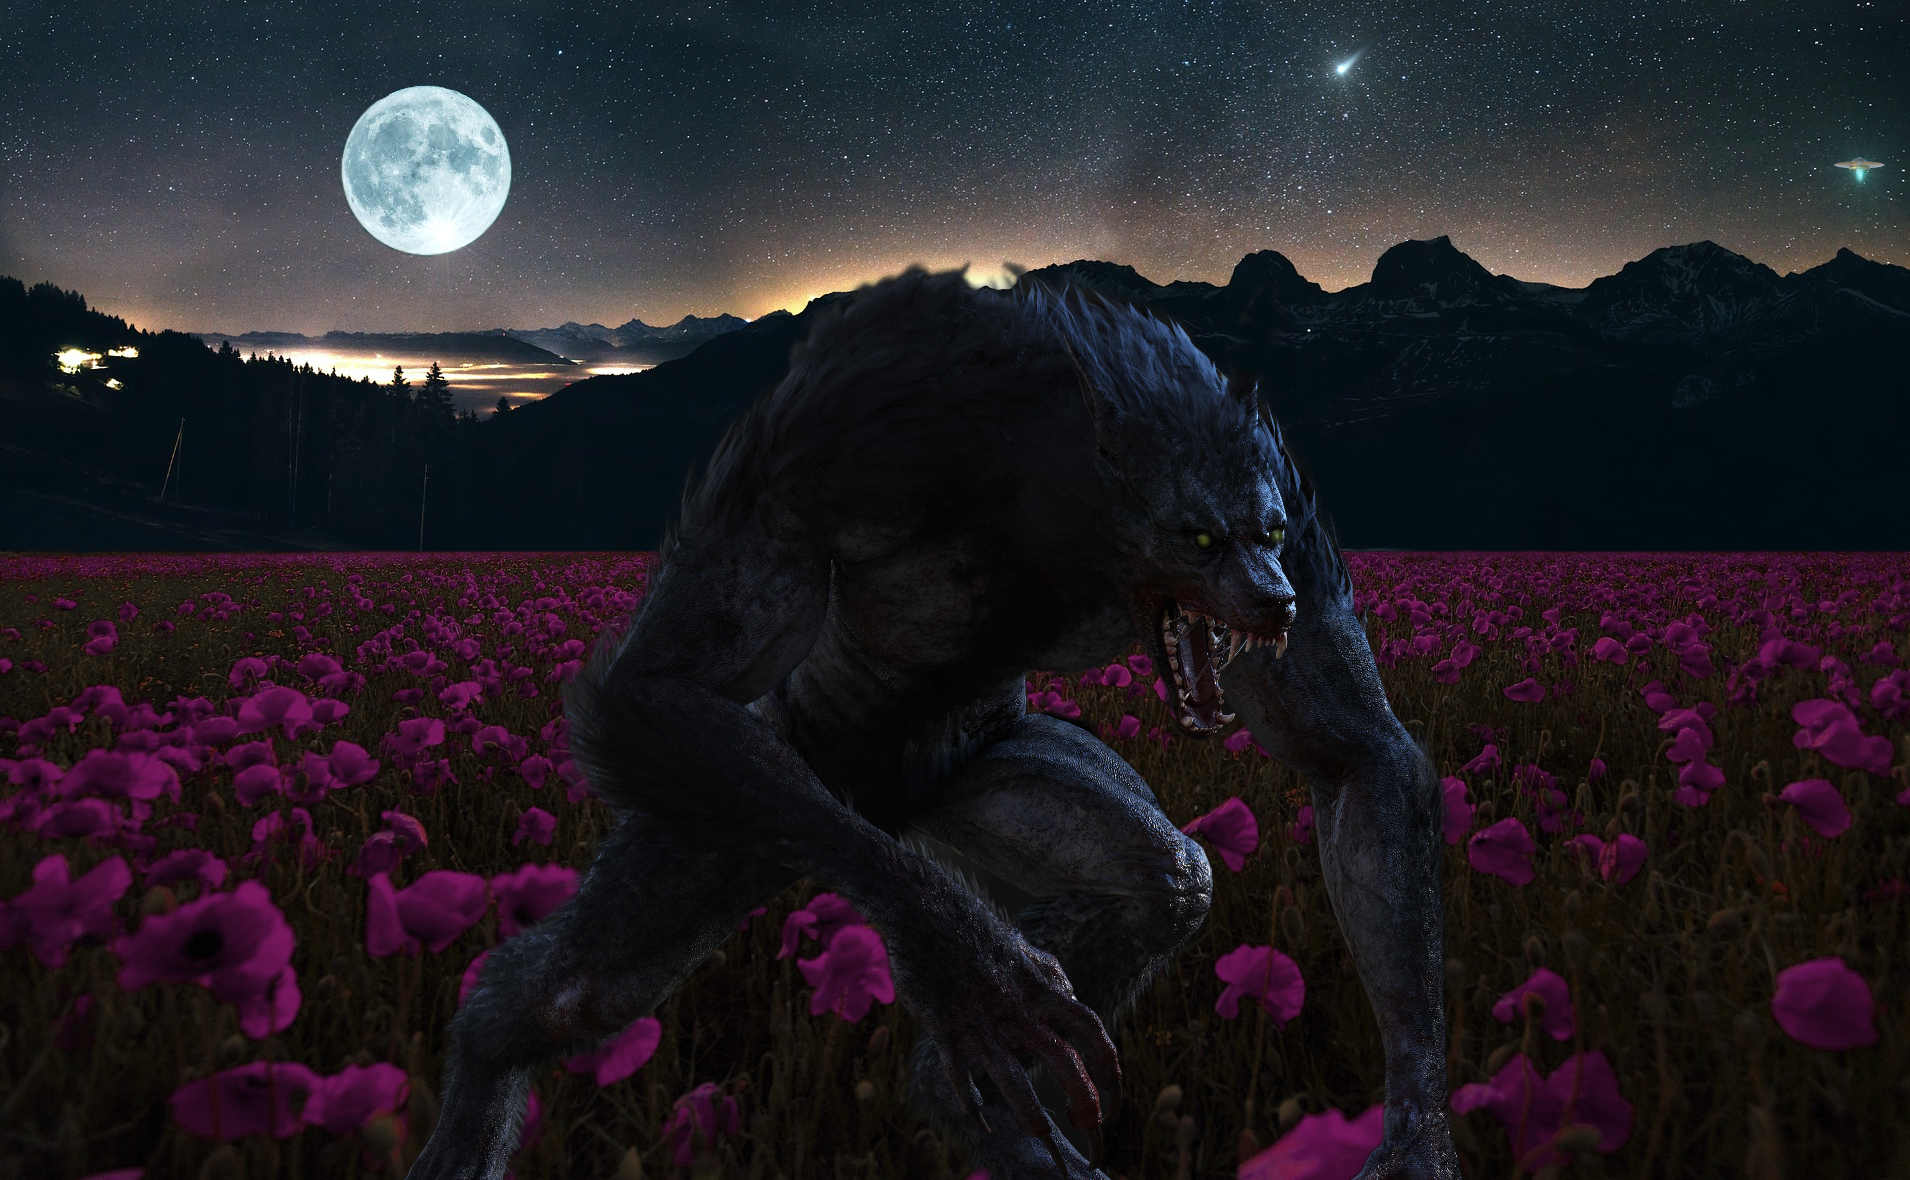 Wayward Werewolf wades through a field of flowers under the May Flower Moon. A UFO hovers in the distance contemplating if it will abduct the monster.